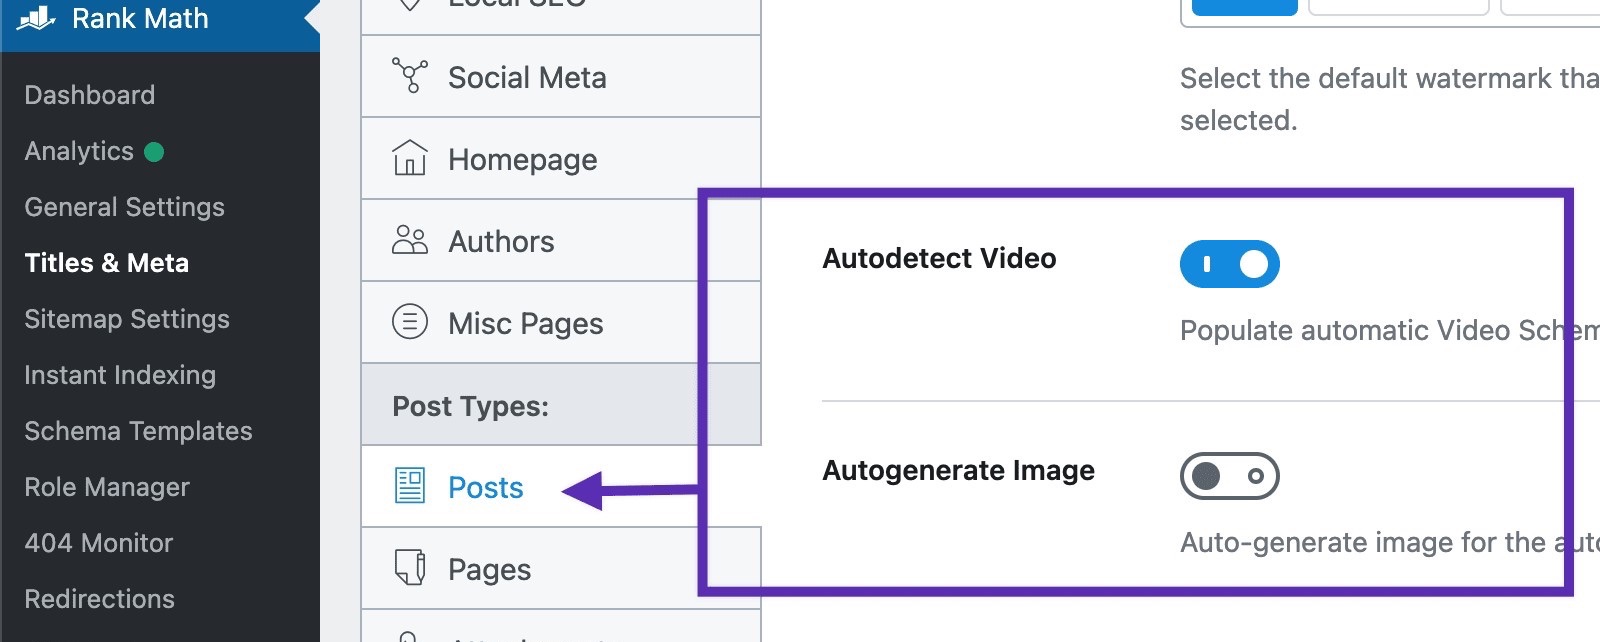 Auto Detect Video for specific post types